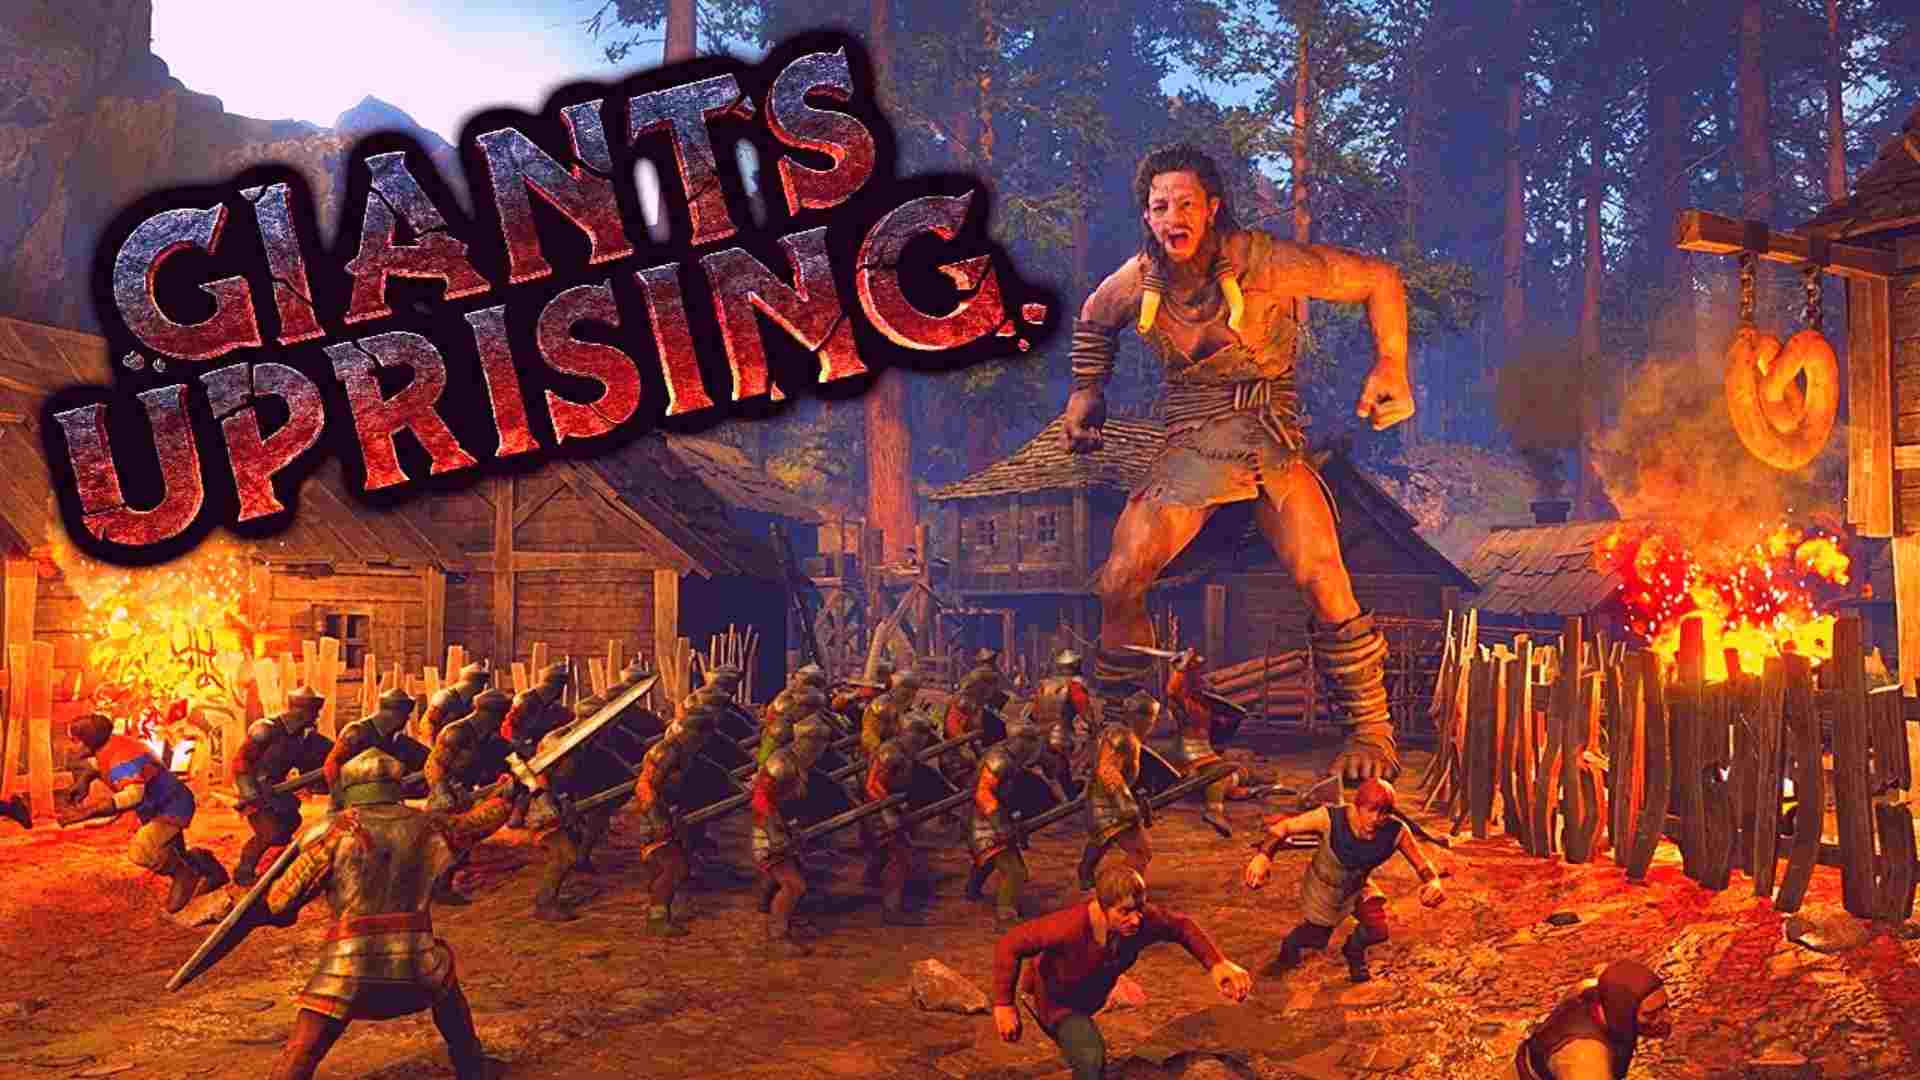 Giants Uprising Parents Guide and Age Rating | 2021